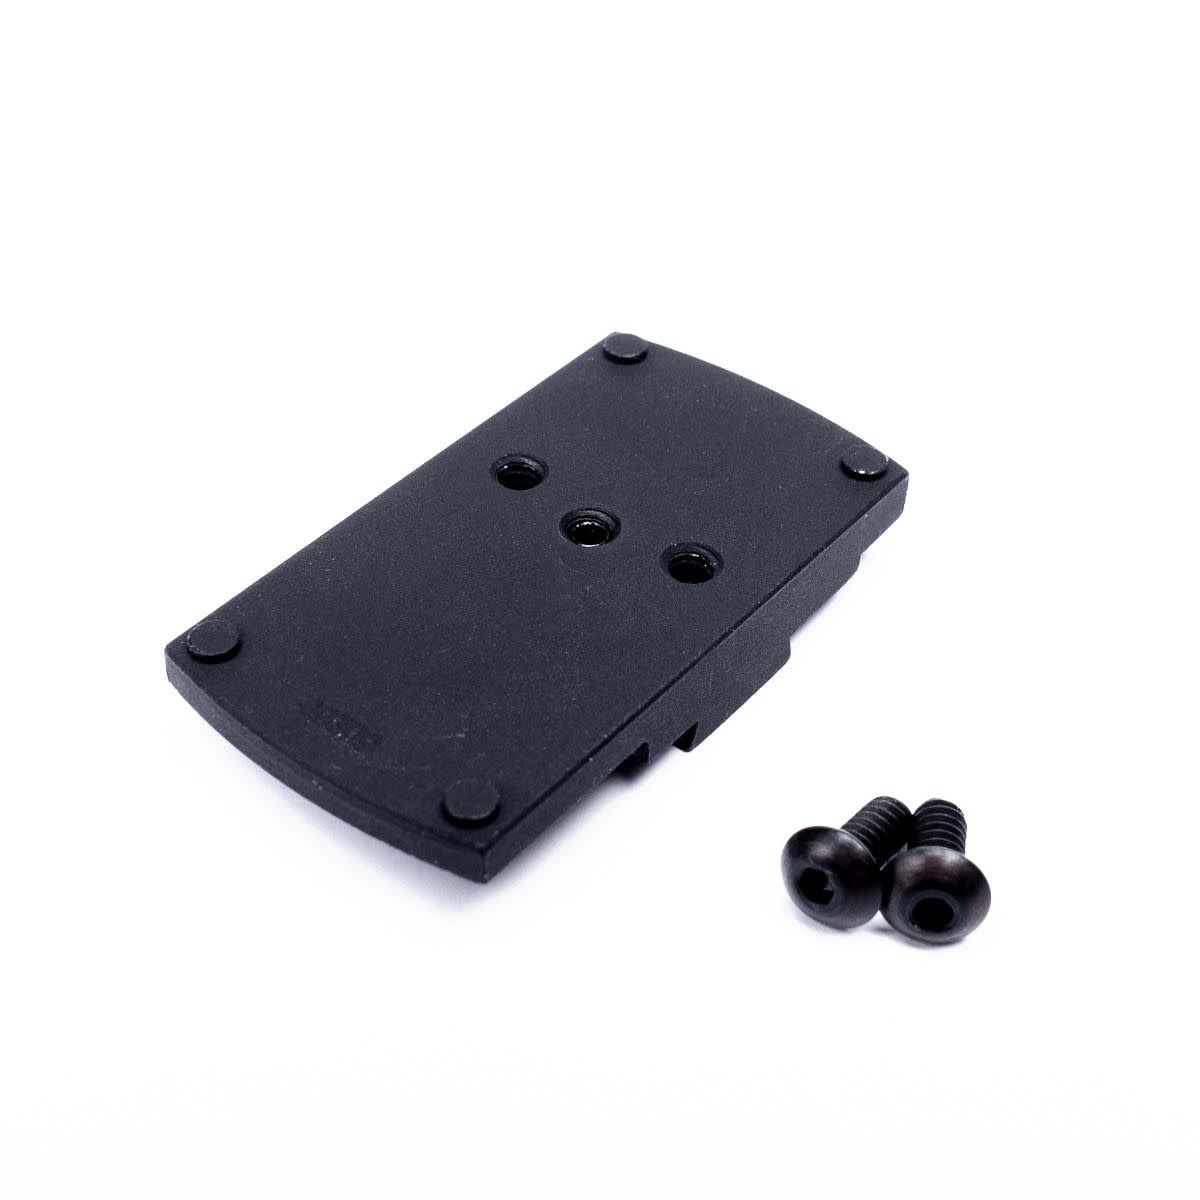 EGW EGW SMITH & WESSON 41 RED DOT SIGHT PLATE MOUNT, VENOM/VIPER/FASTFIRE/DOCTER